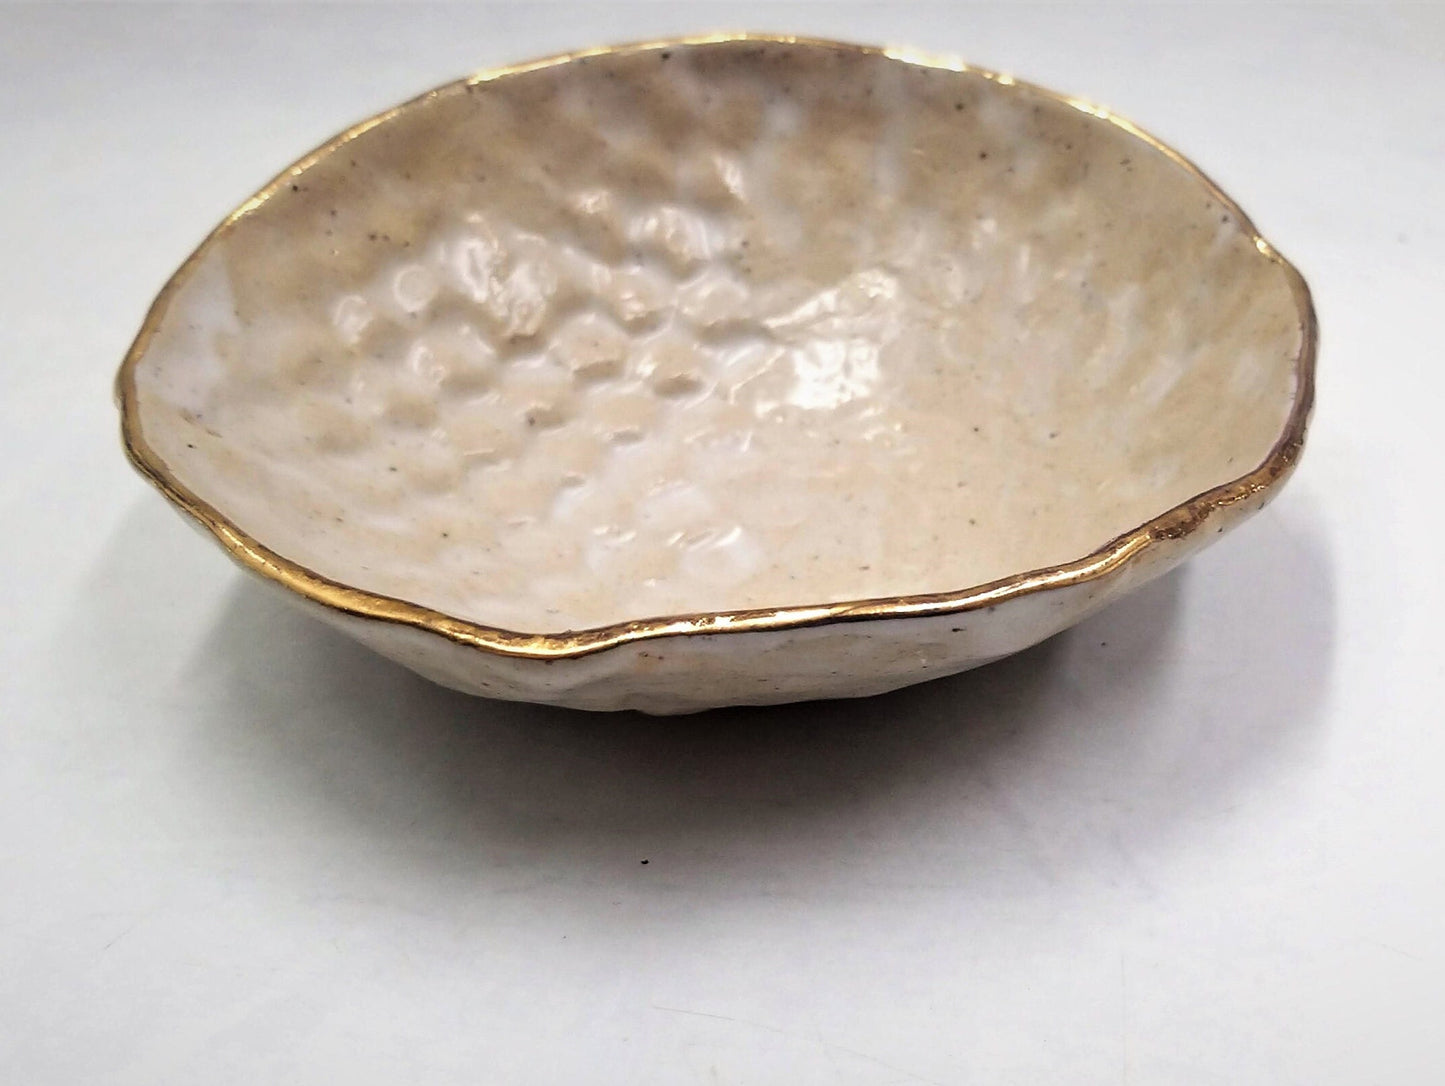 Beige Pottery Bowl with 24k Gold Finish